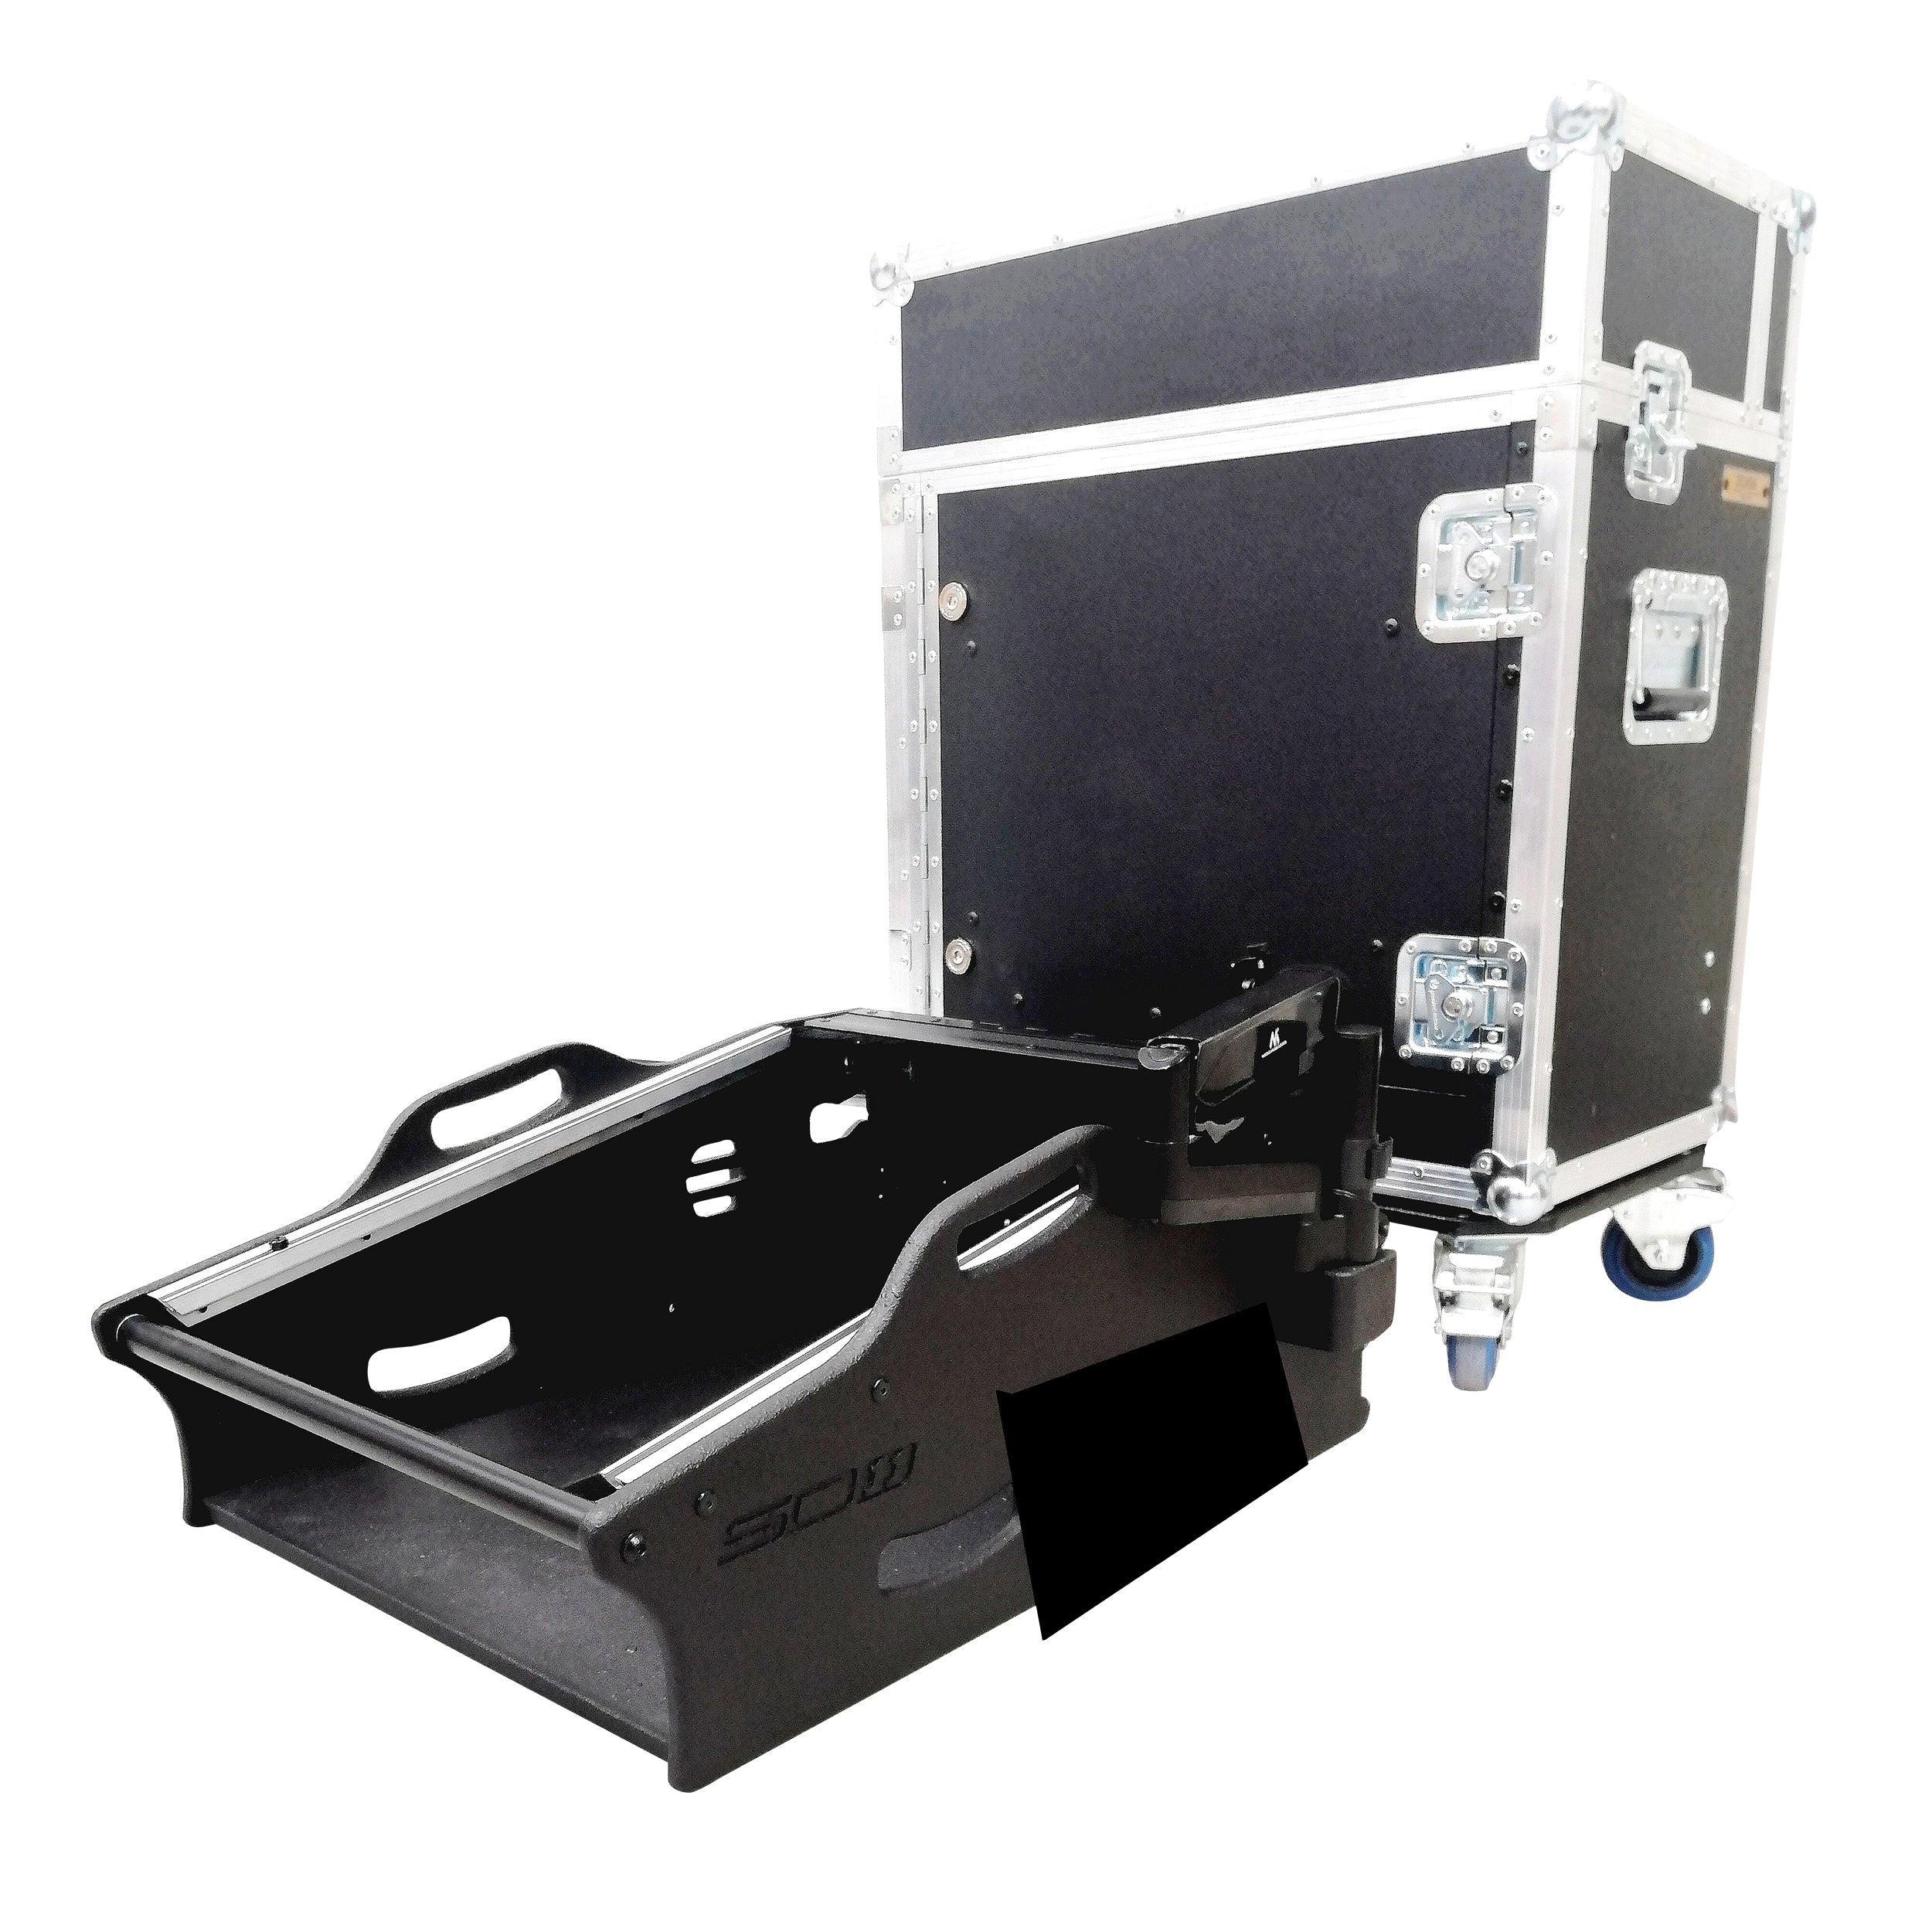 Pro X Flip-Ready Detachable Easy Retracting Hydraulic Lift Case With for Digico SD11 Digital Mixing Console by ZCase® XZF-DIG-SD11 D